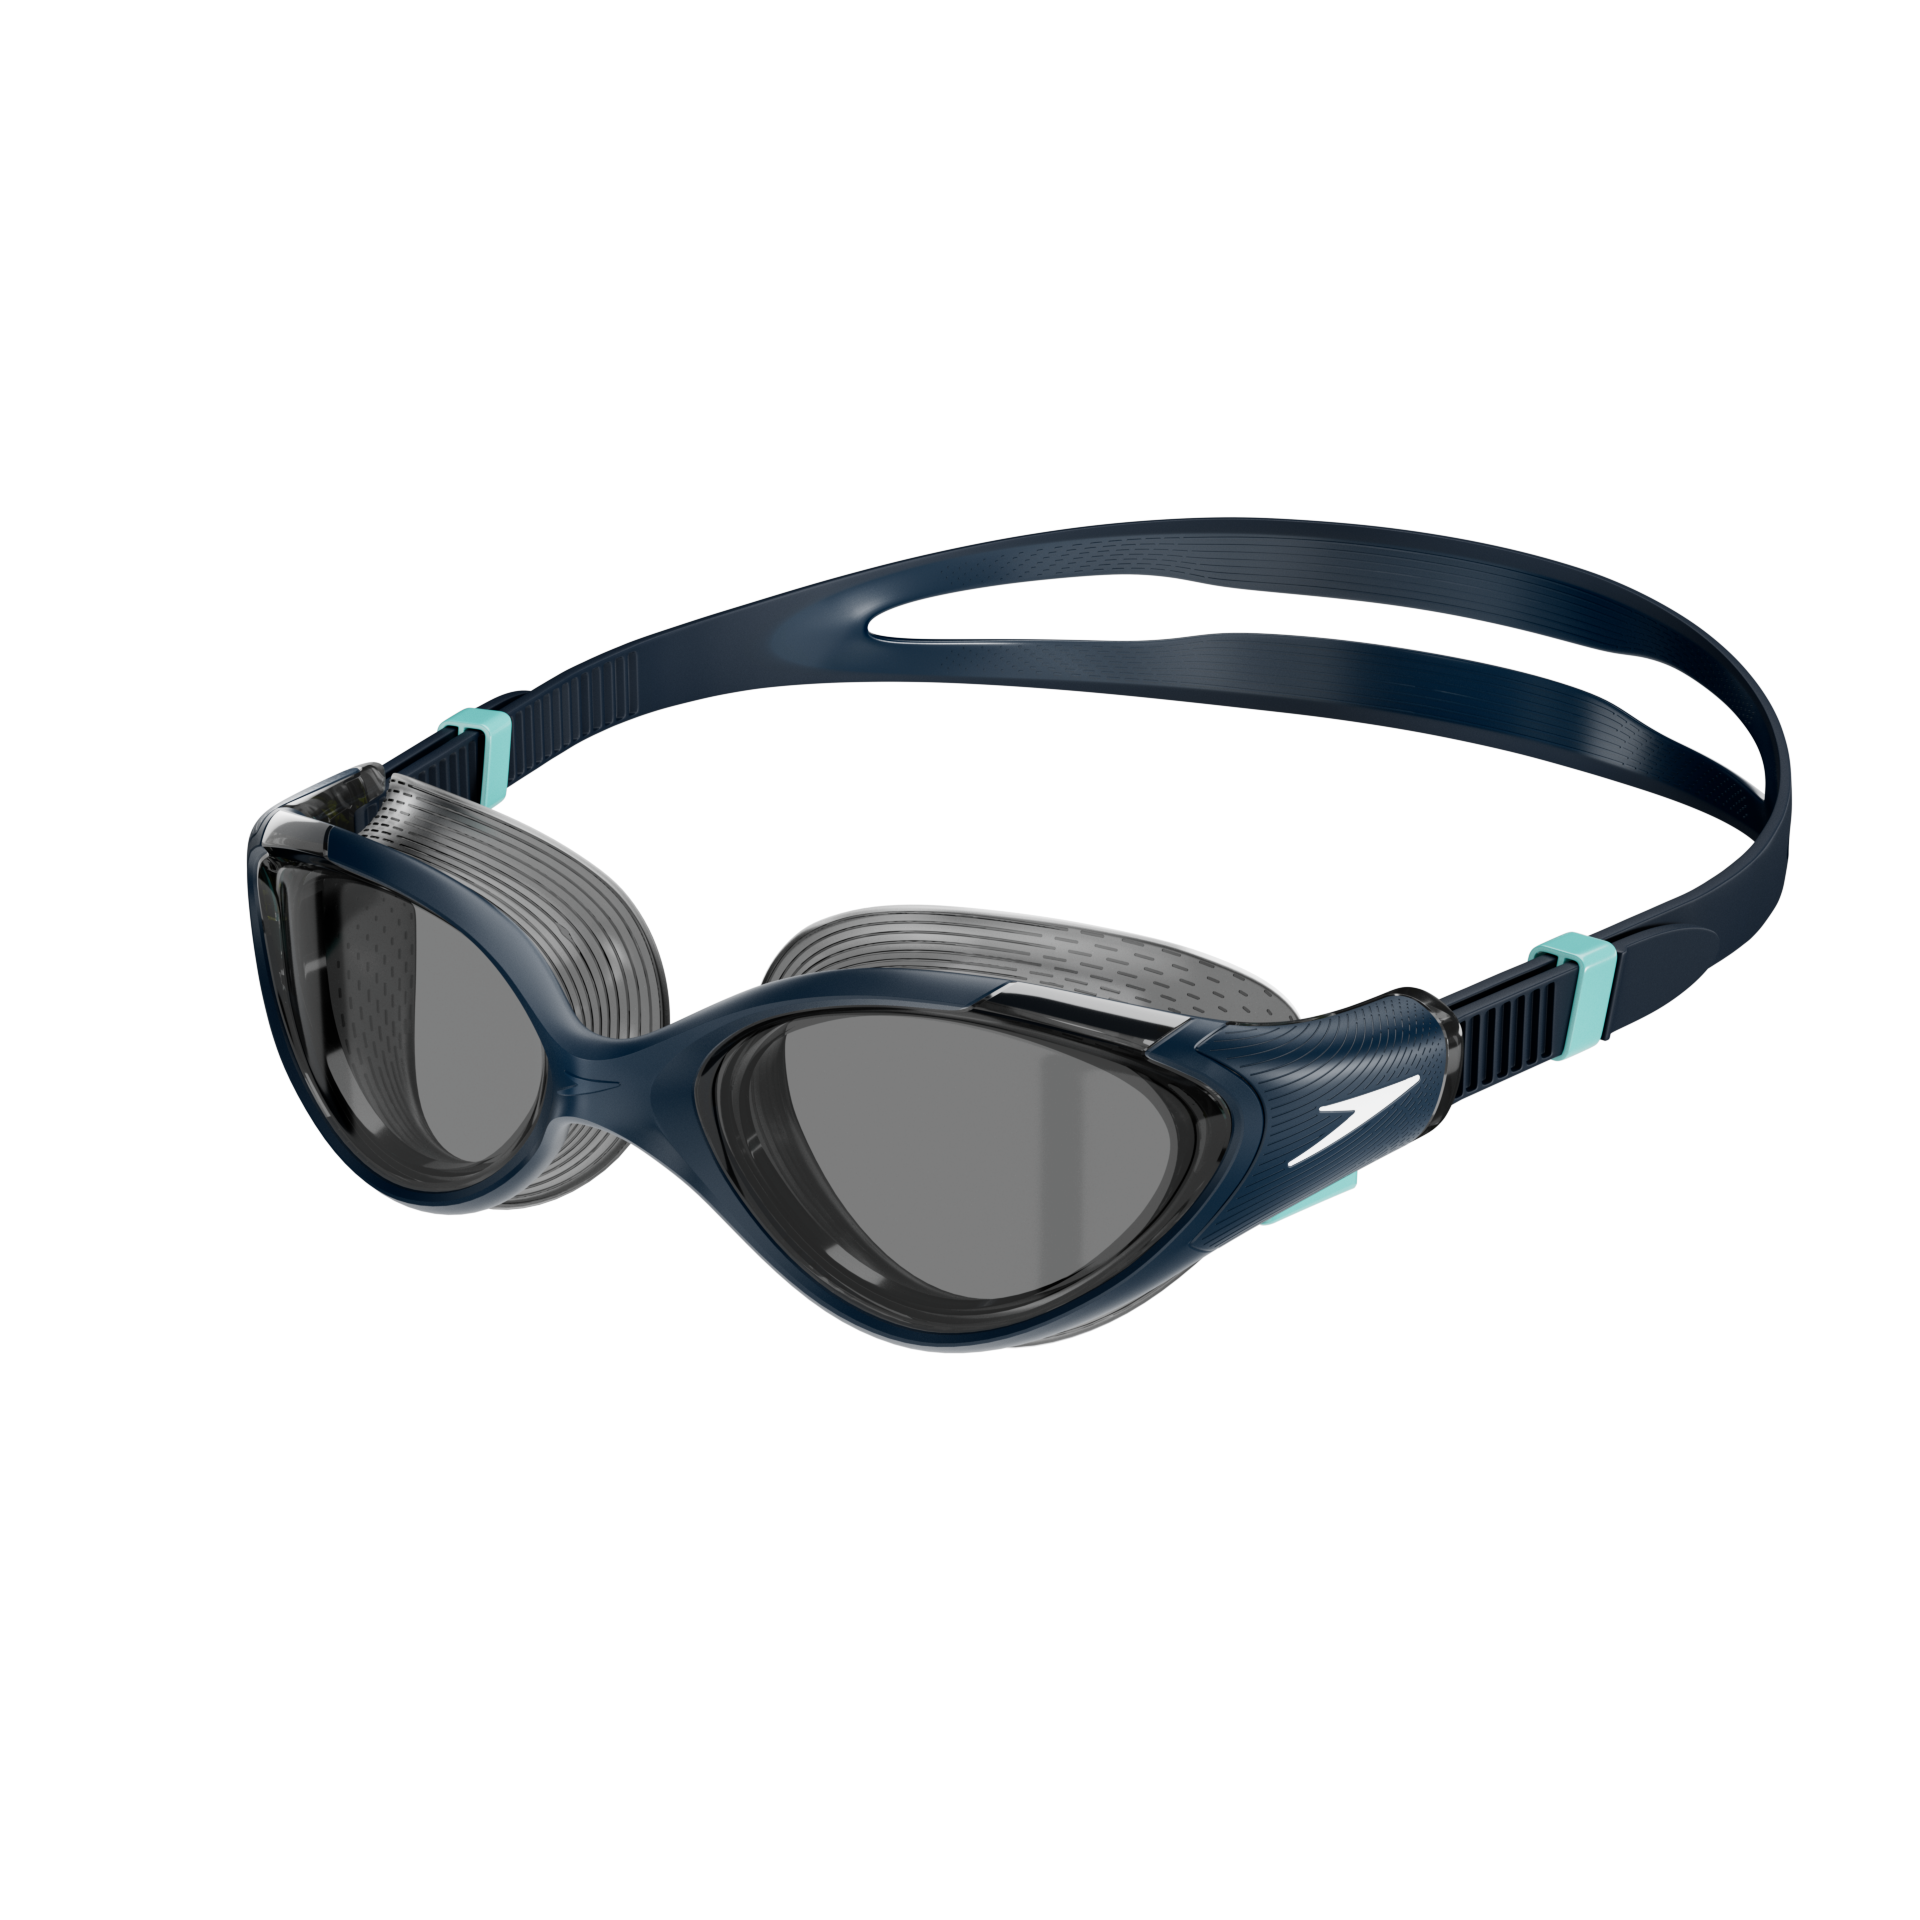 Womens Biofuse 2.0 Swimming Goggles